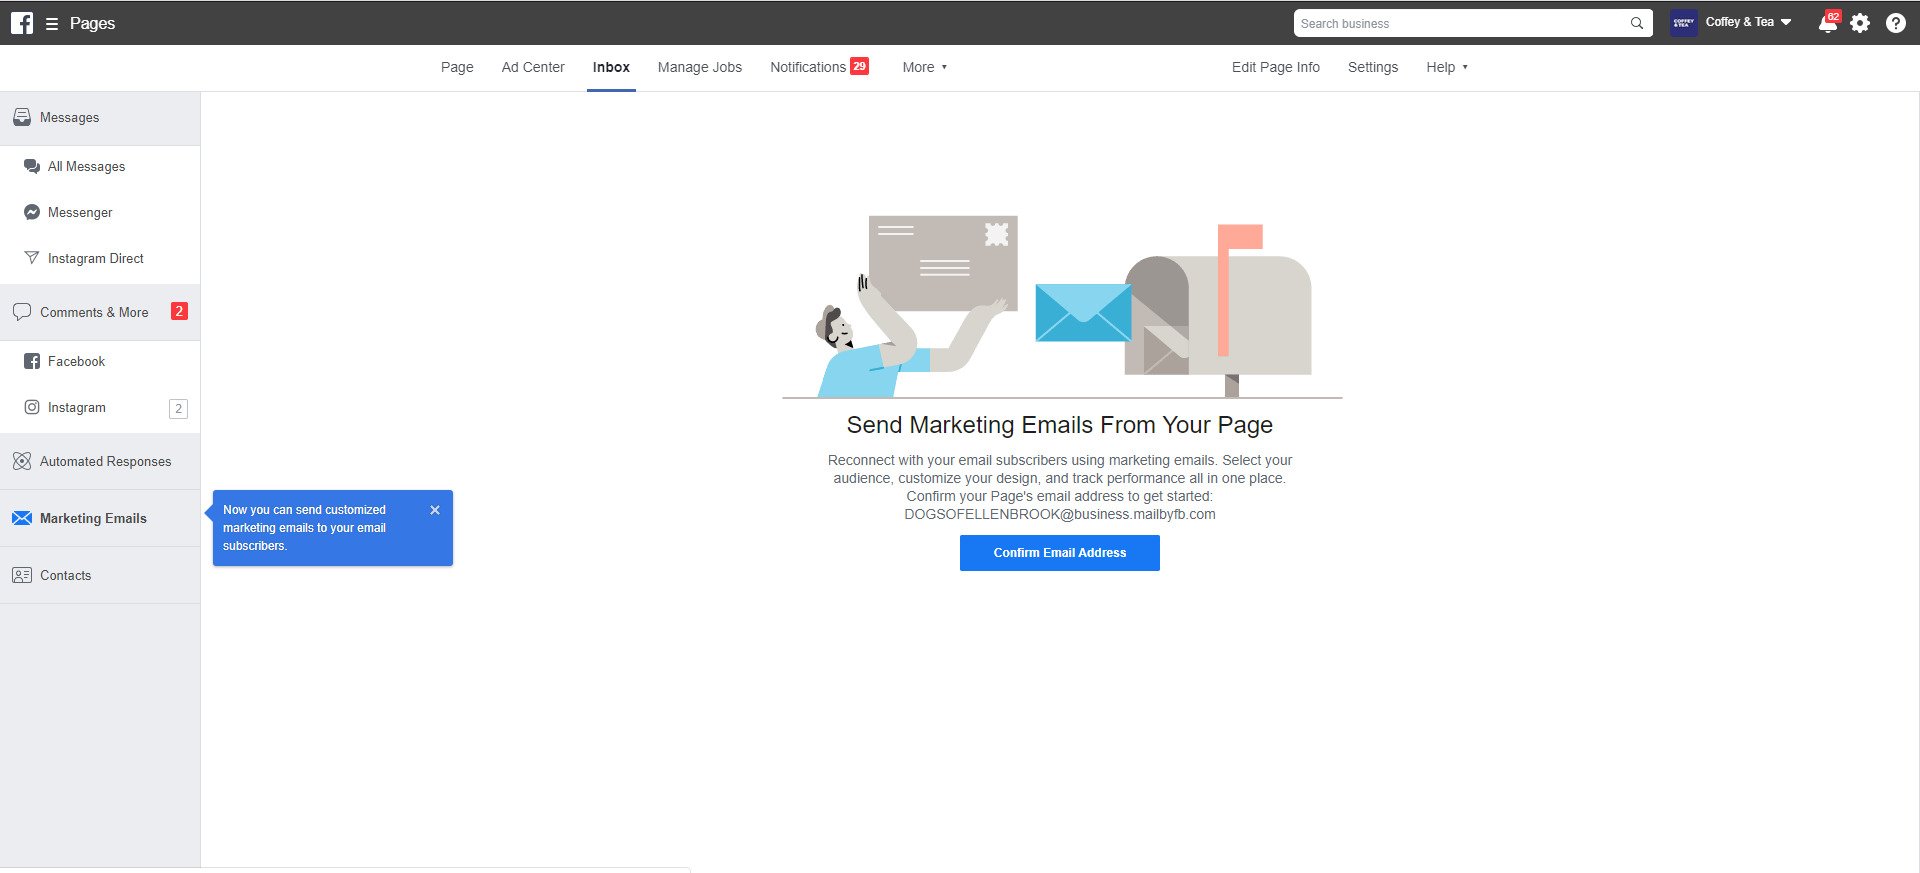 Facebook Email Marketing Tools Preview - Top4 Marketing